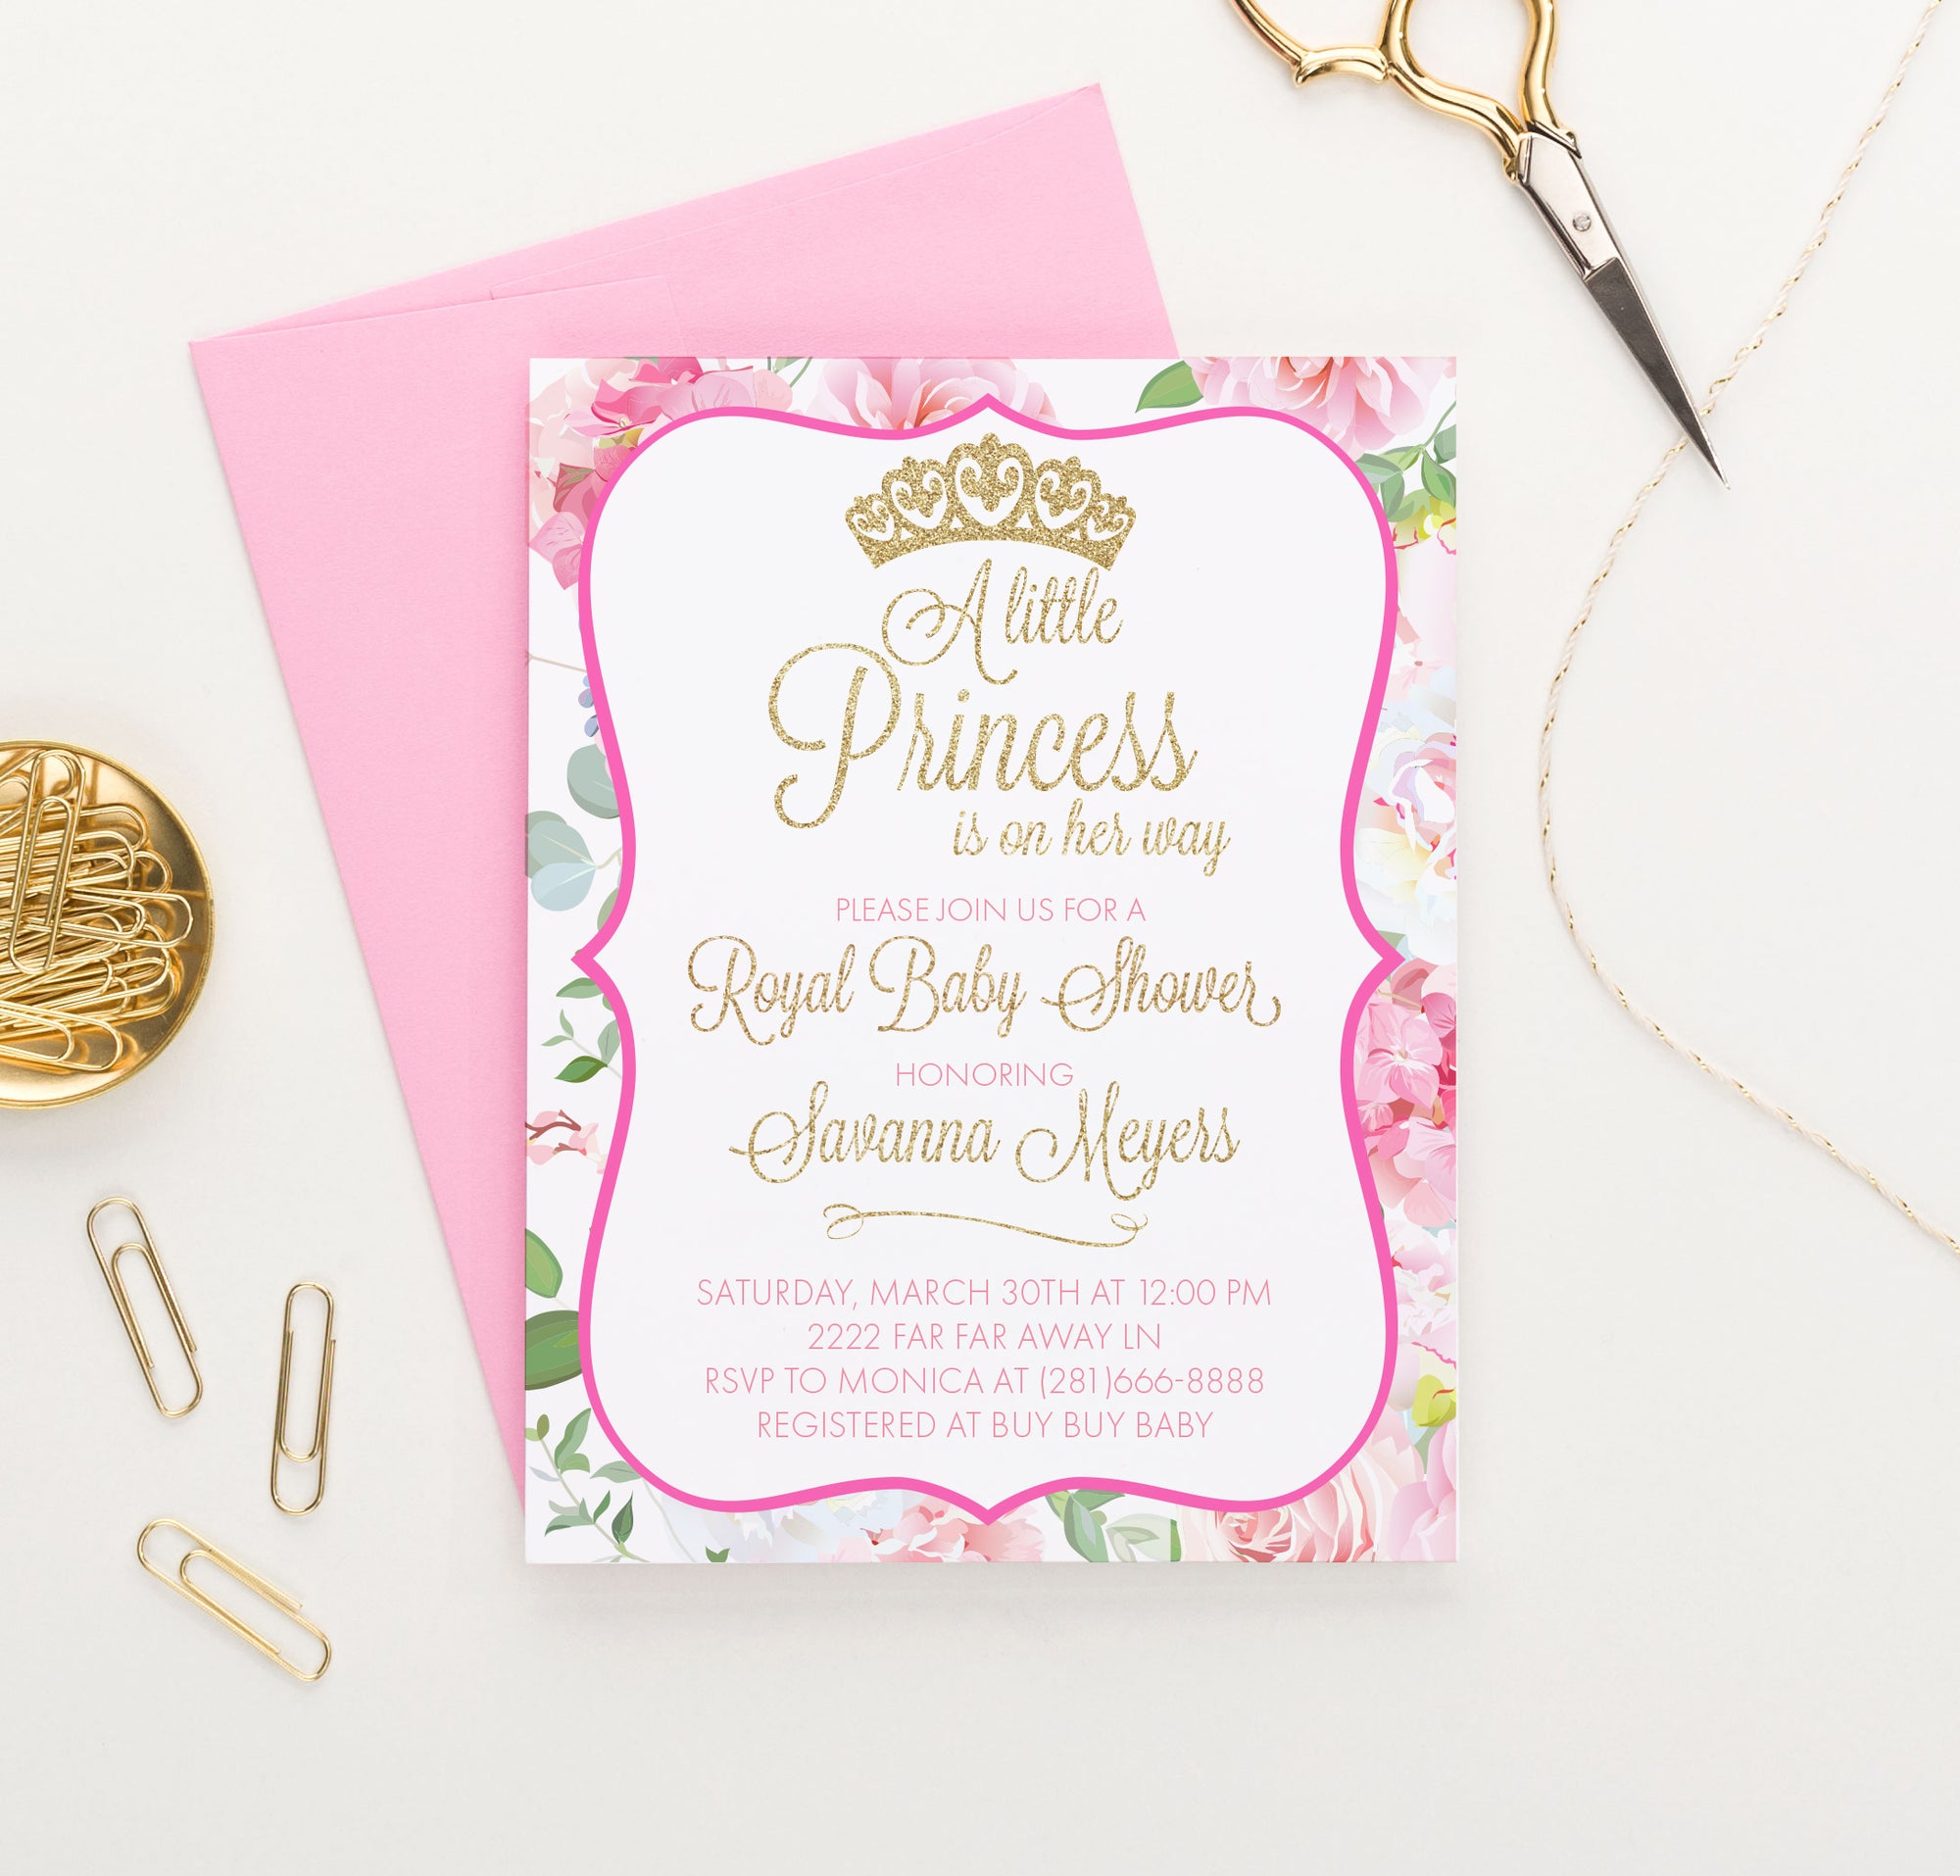 Personalized Princess Baby Shower Invitations With Pink Floral